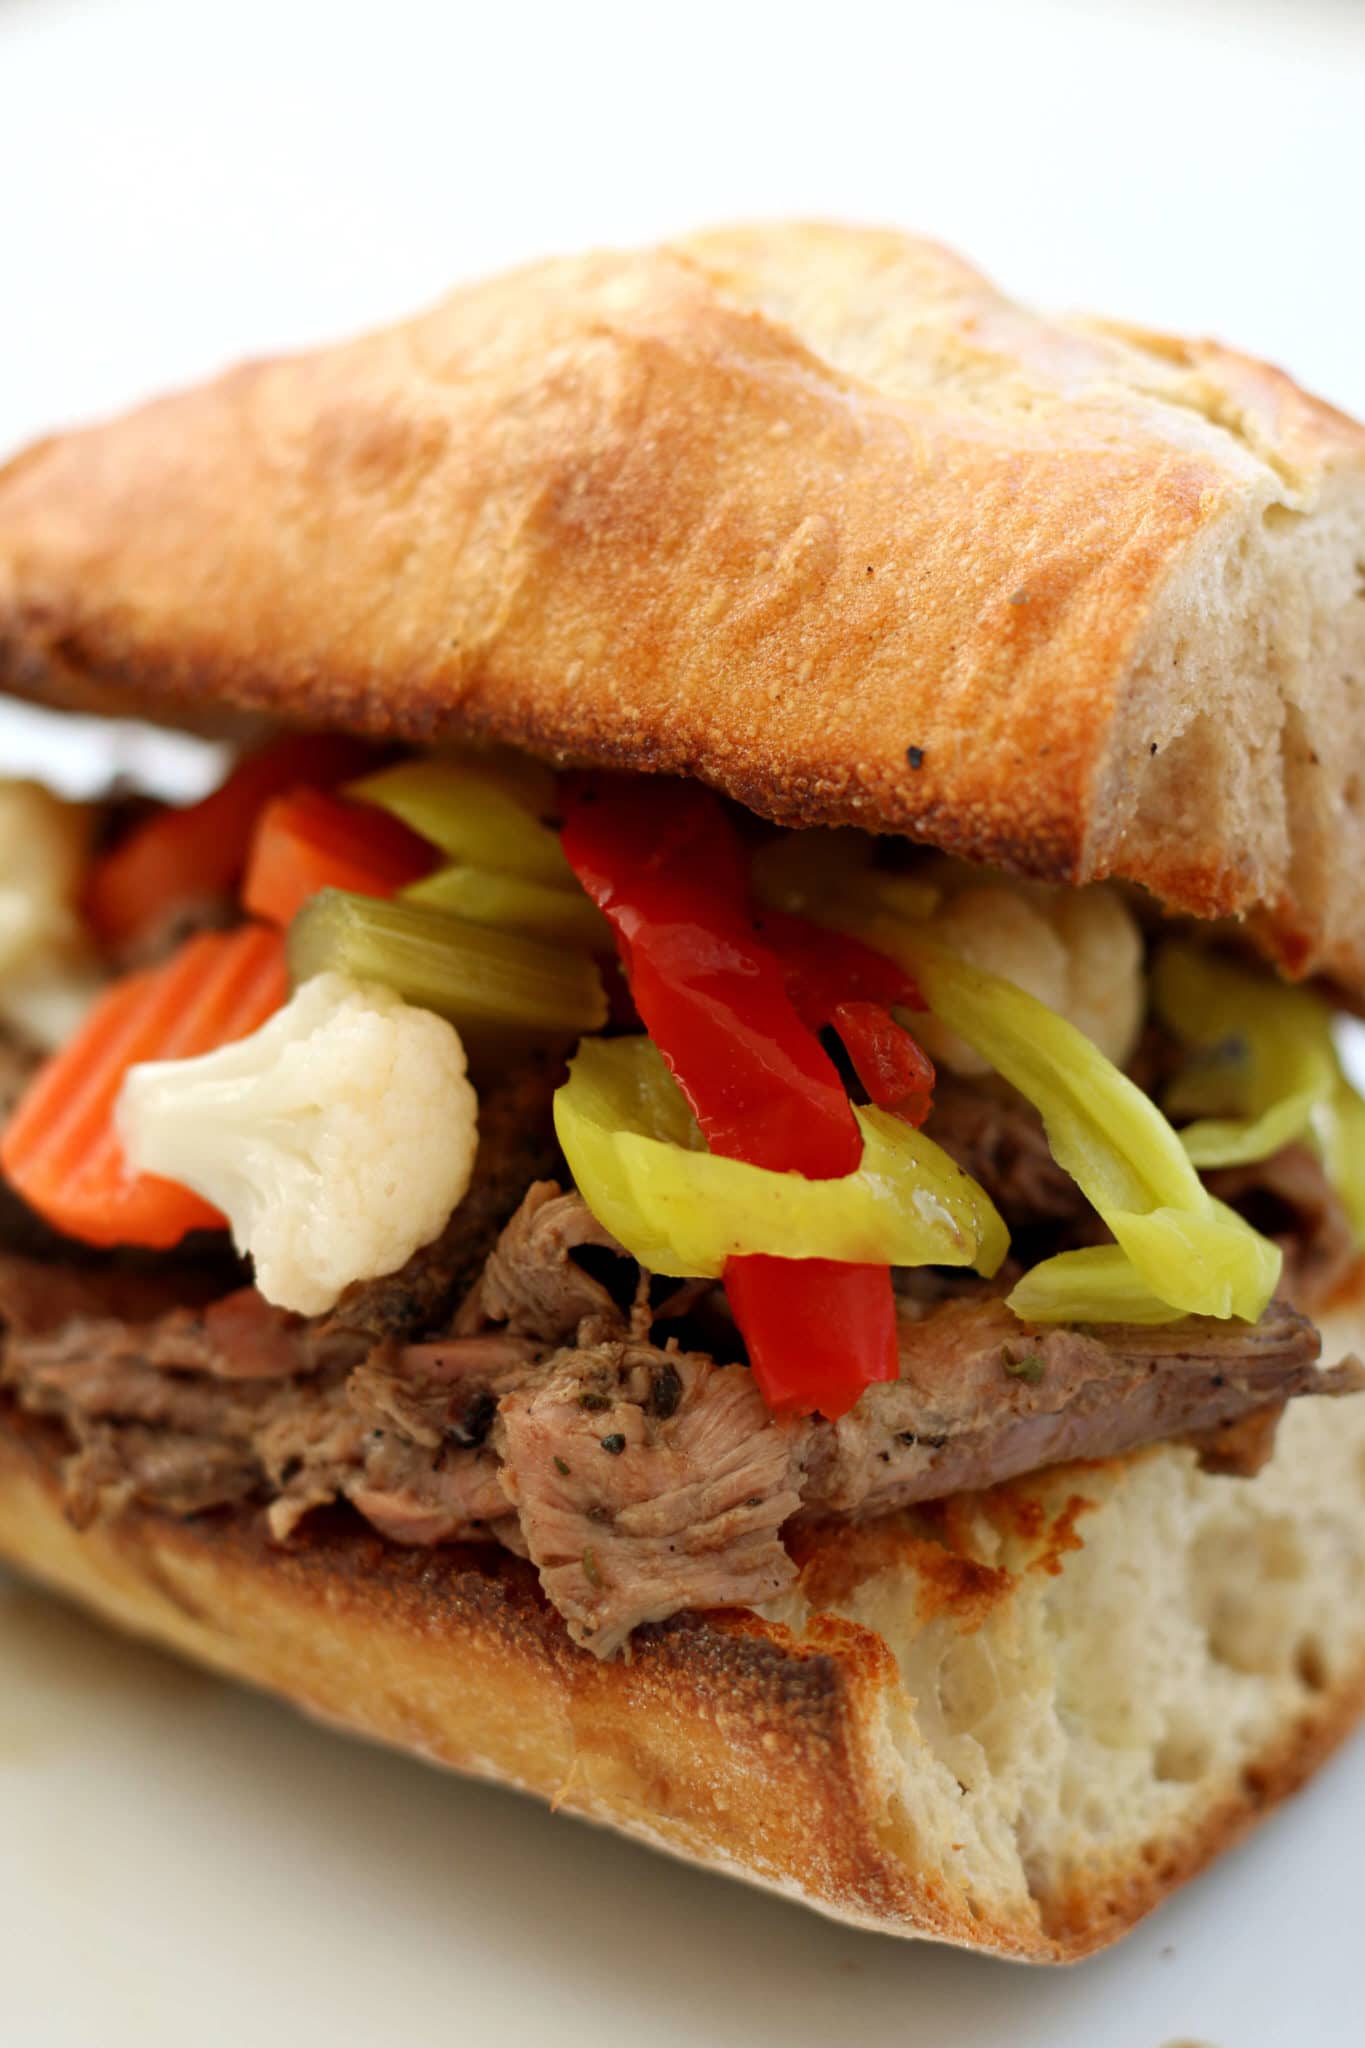 Instant Pot Chicago Italian Beef Sandwiches from 365 Days of Slow + Pressure Cooking